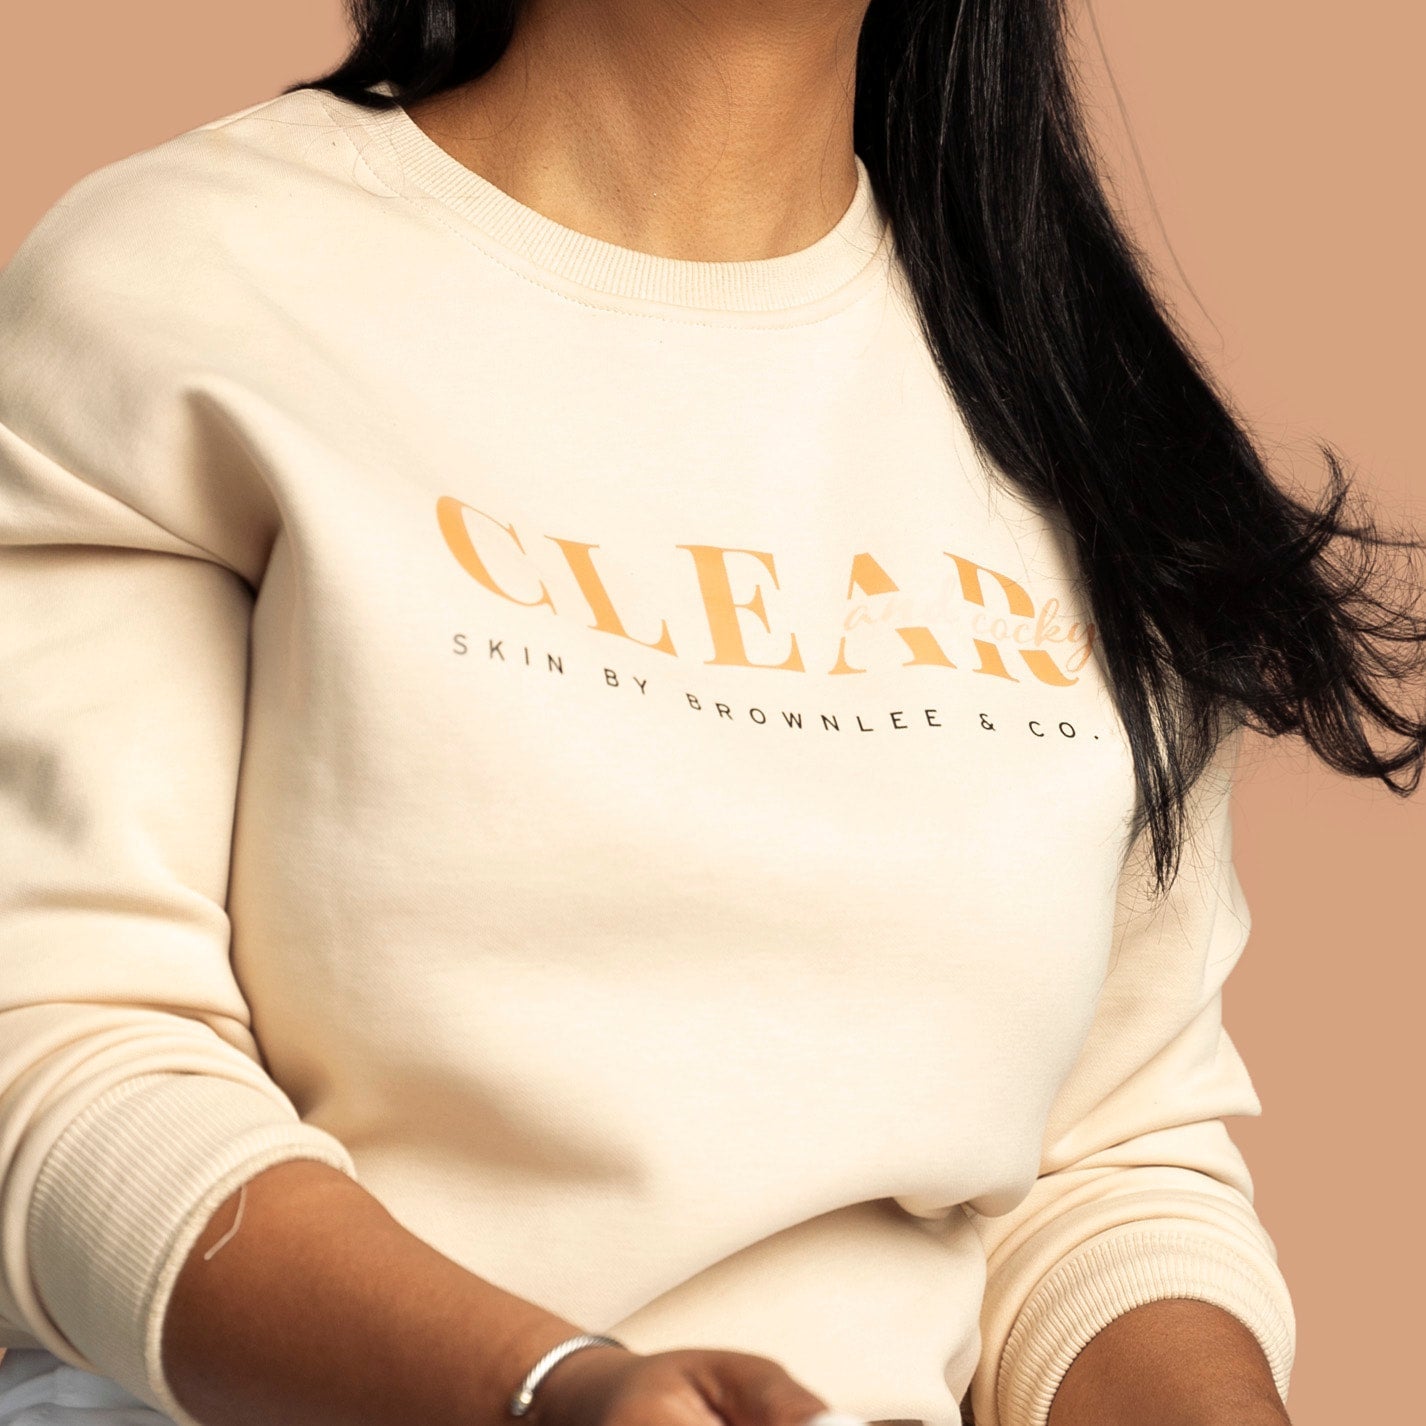 Clear & Cocky Sweatshirt - Skin by Brownlee & Co.